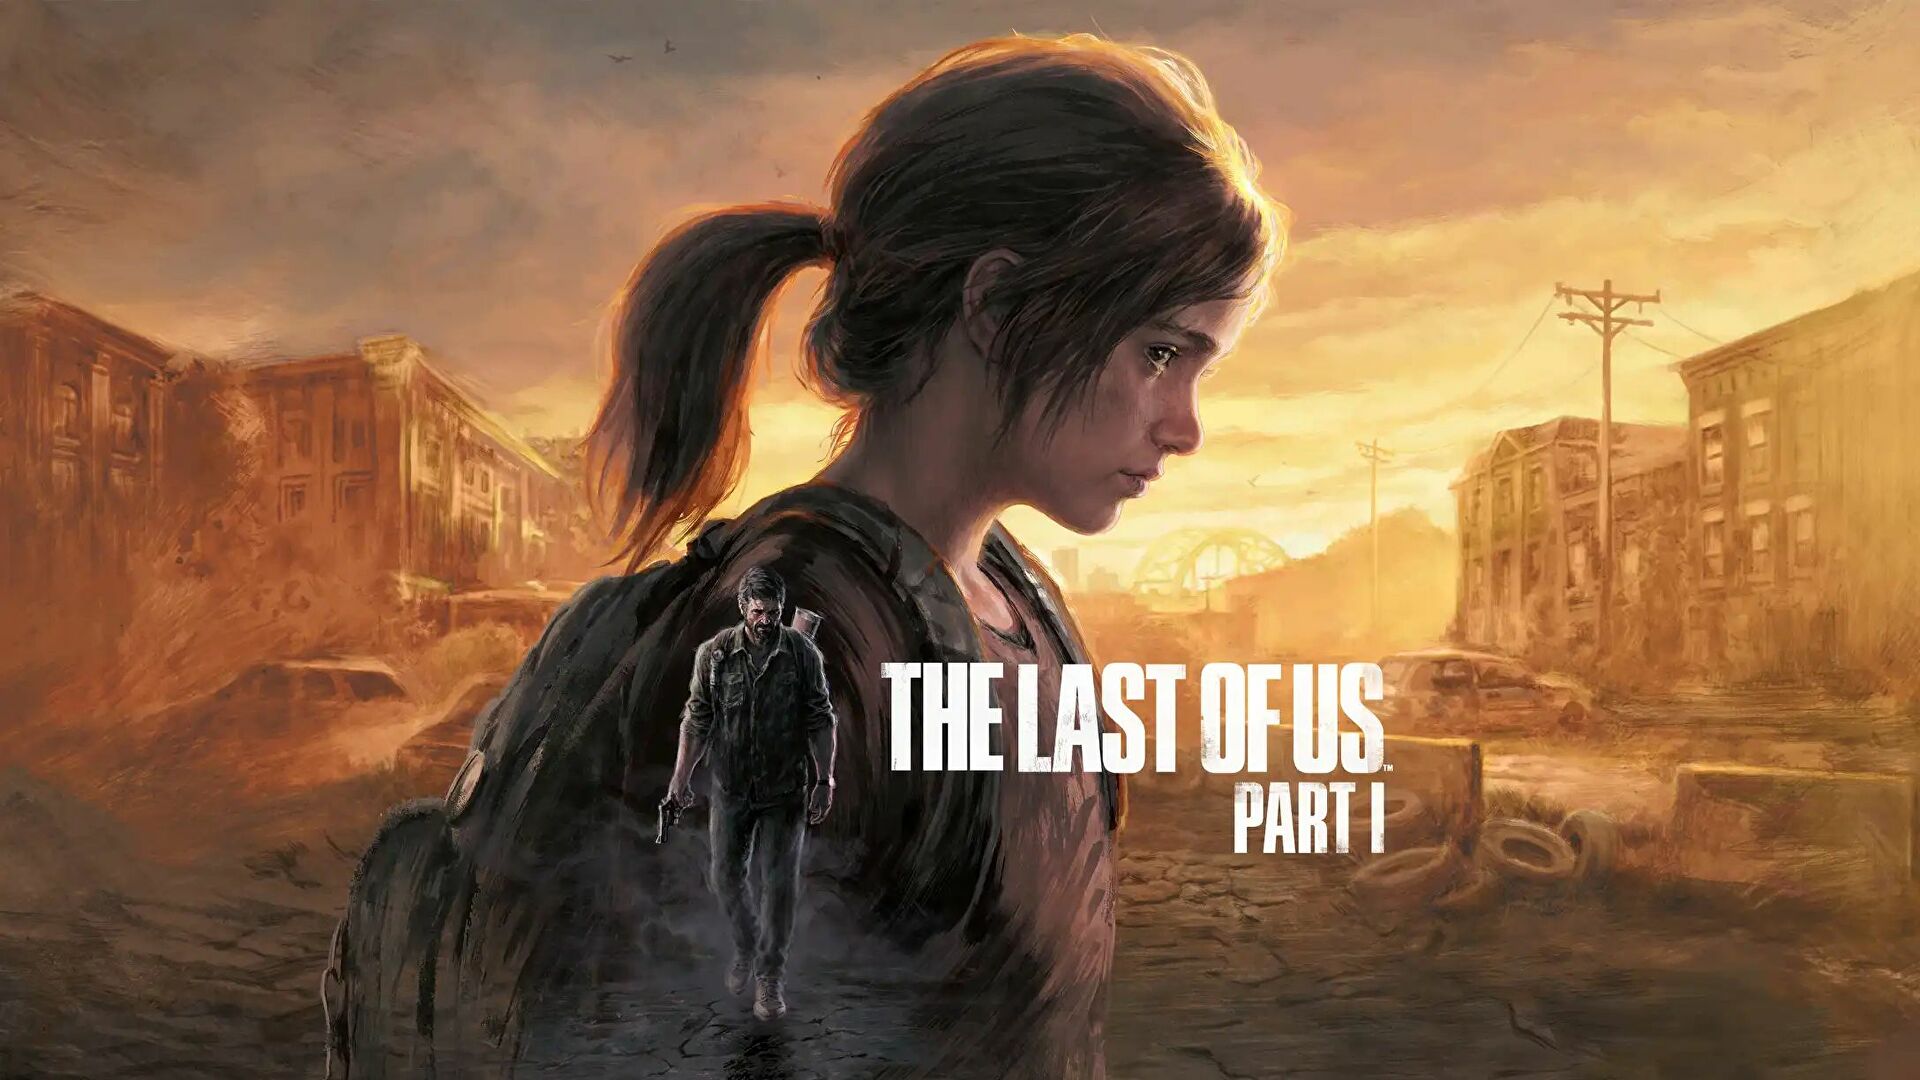 The Last of Us Is Coming to PC and PS5